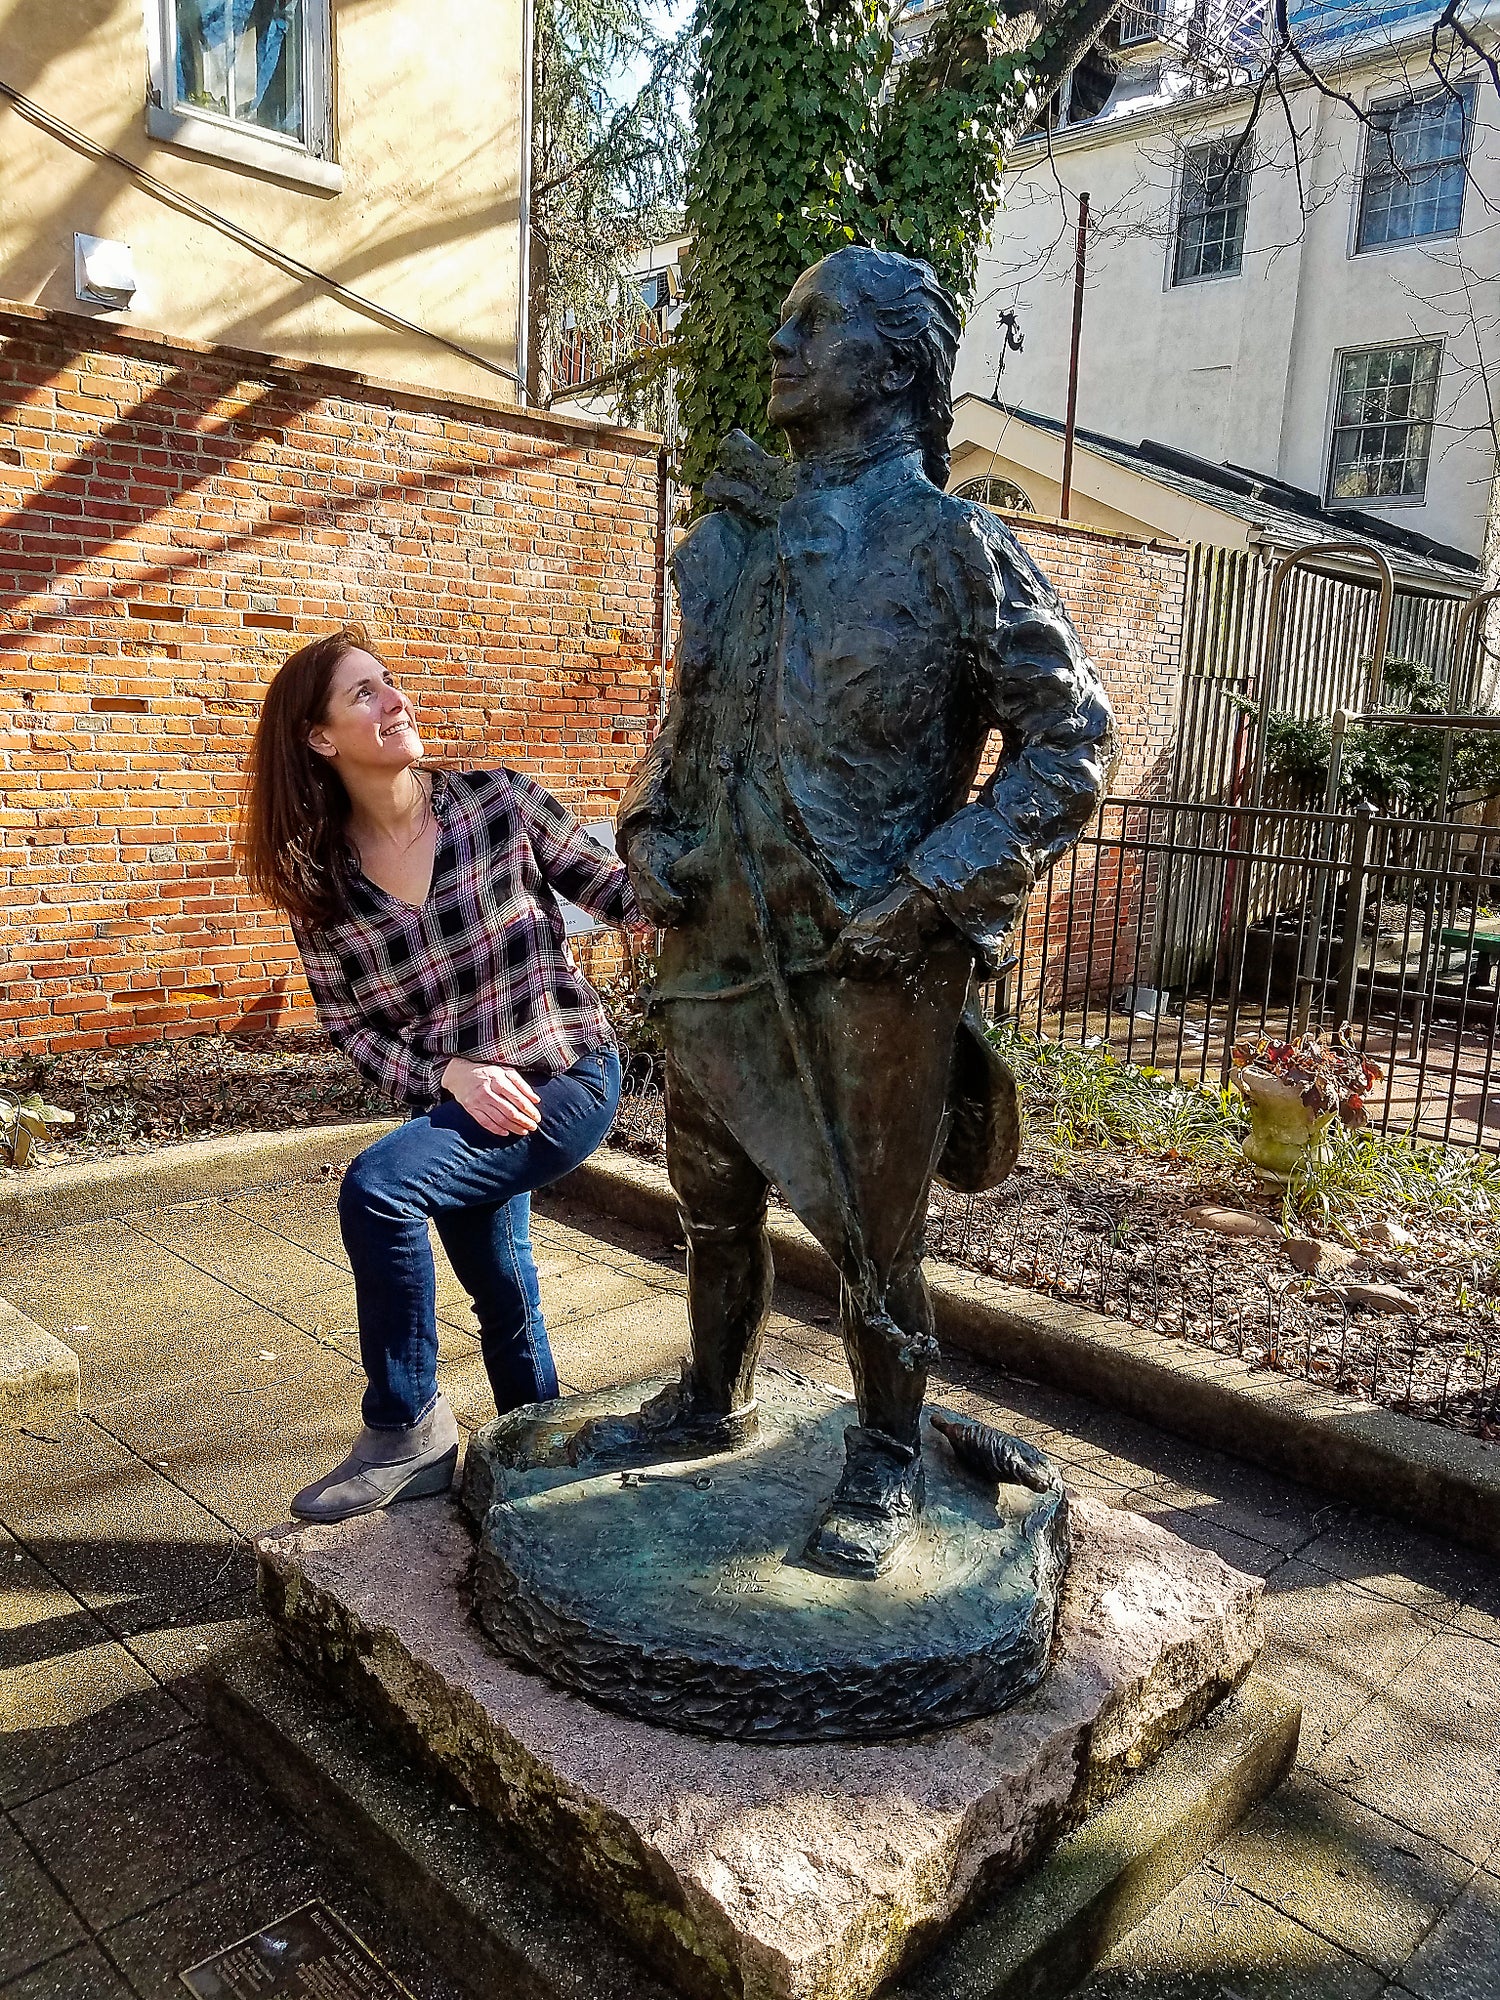 Dana Lynch, owner of Blue Kite Press with Ben Franklin and kite statue in Philadelphia, PA